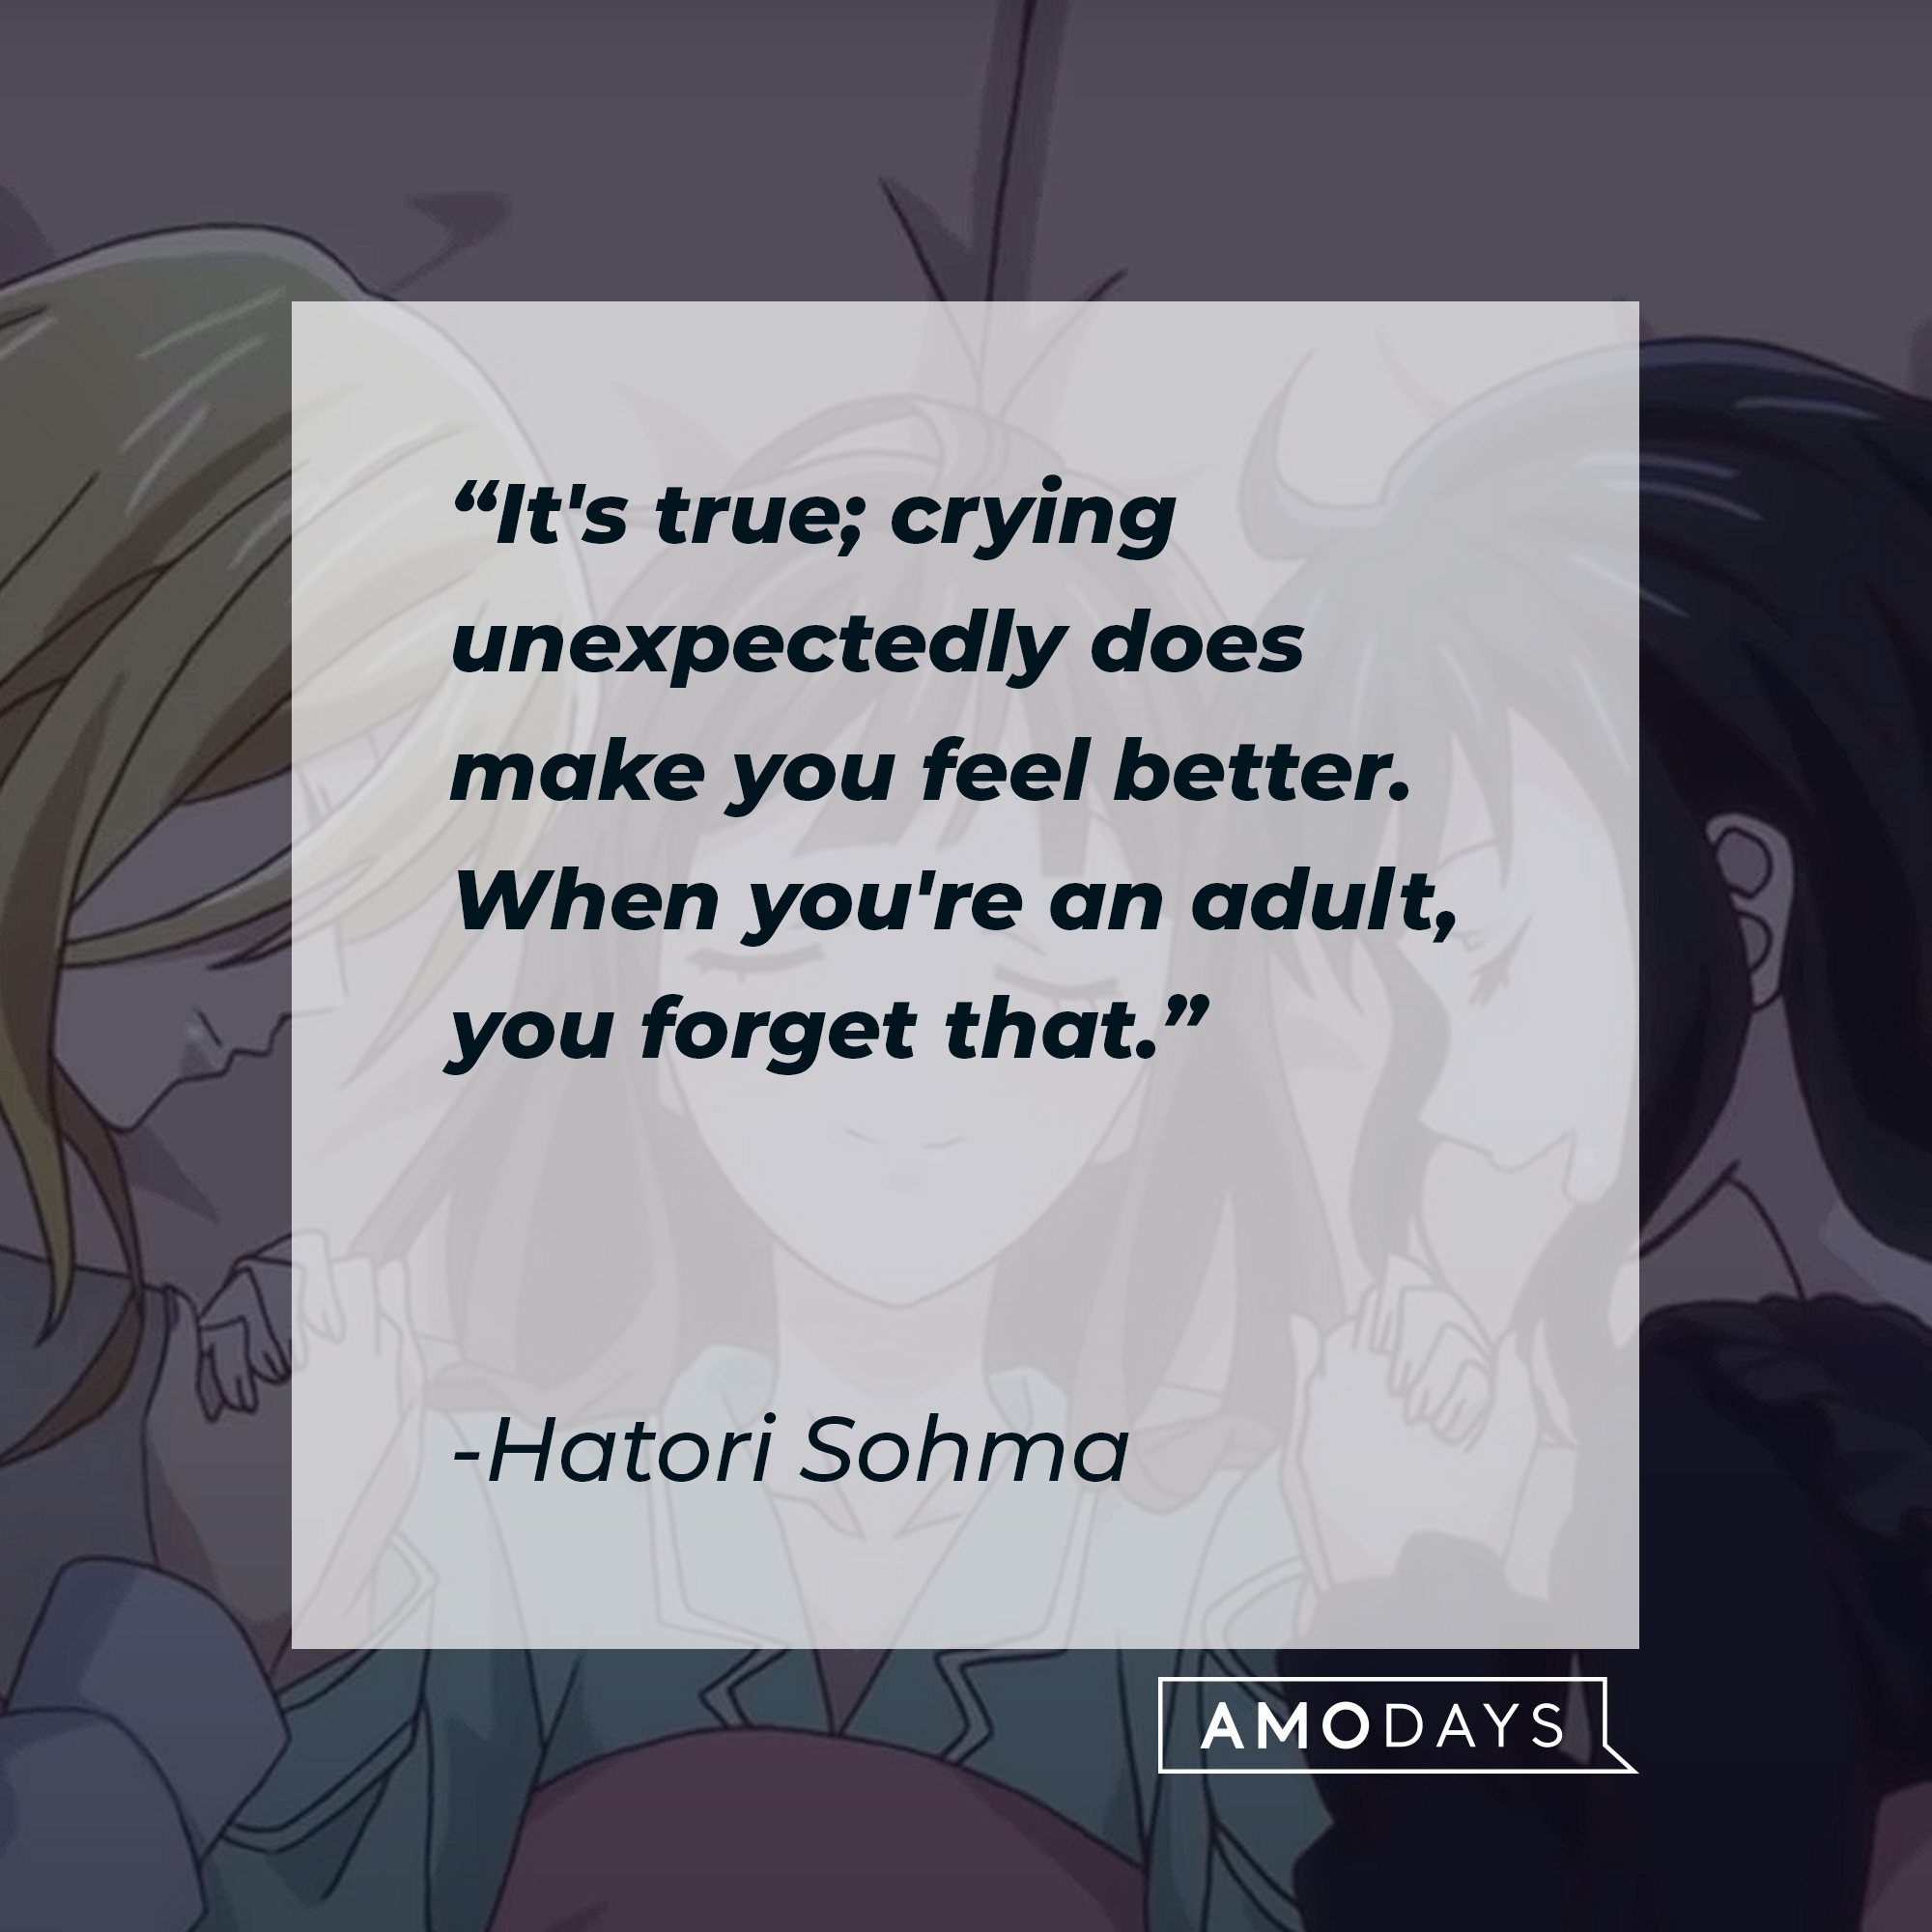 Hatori Sohma's quote: "It's true; crying unexpectedly does make you feel better. When you're an adult, you forget that." | Image: youtube.com/Crunchyroll Collection